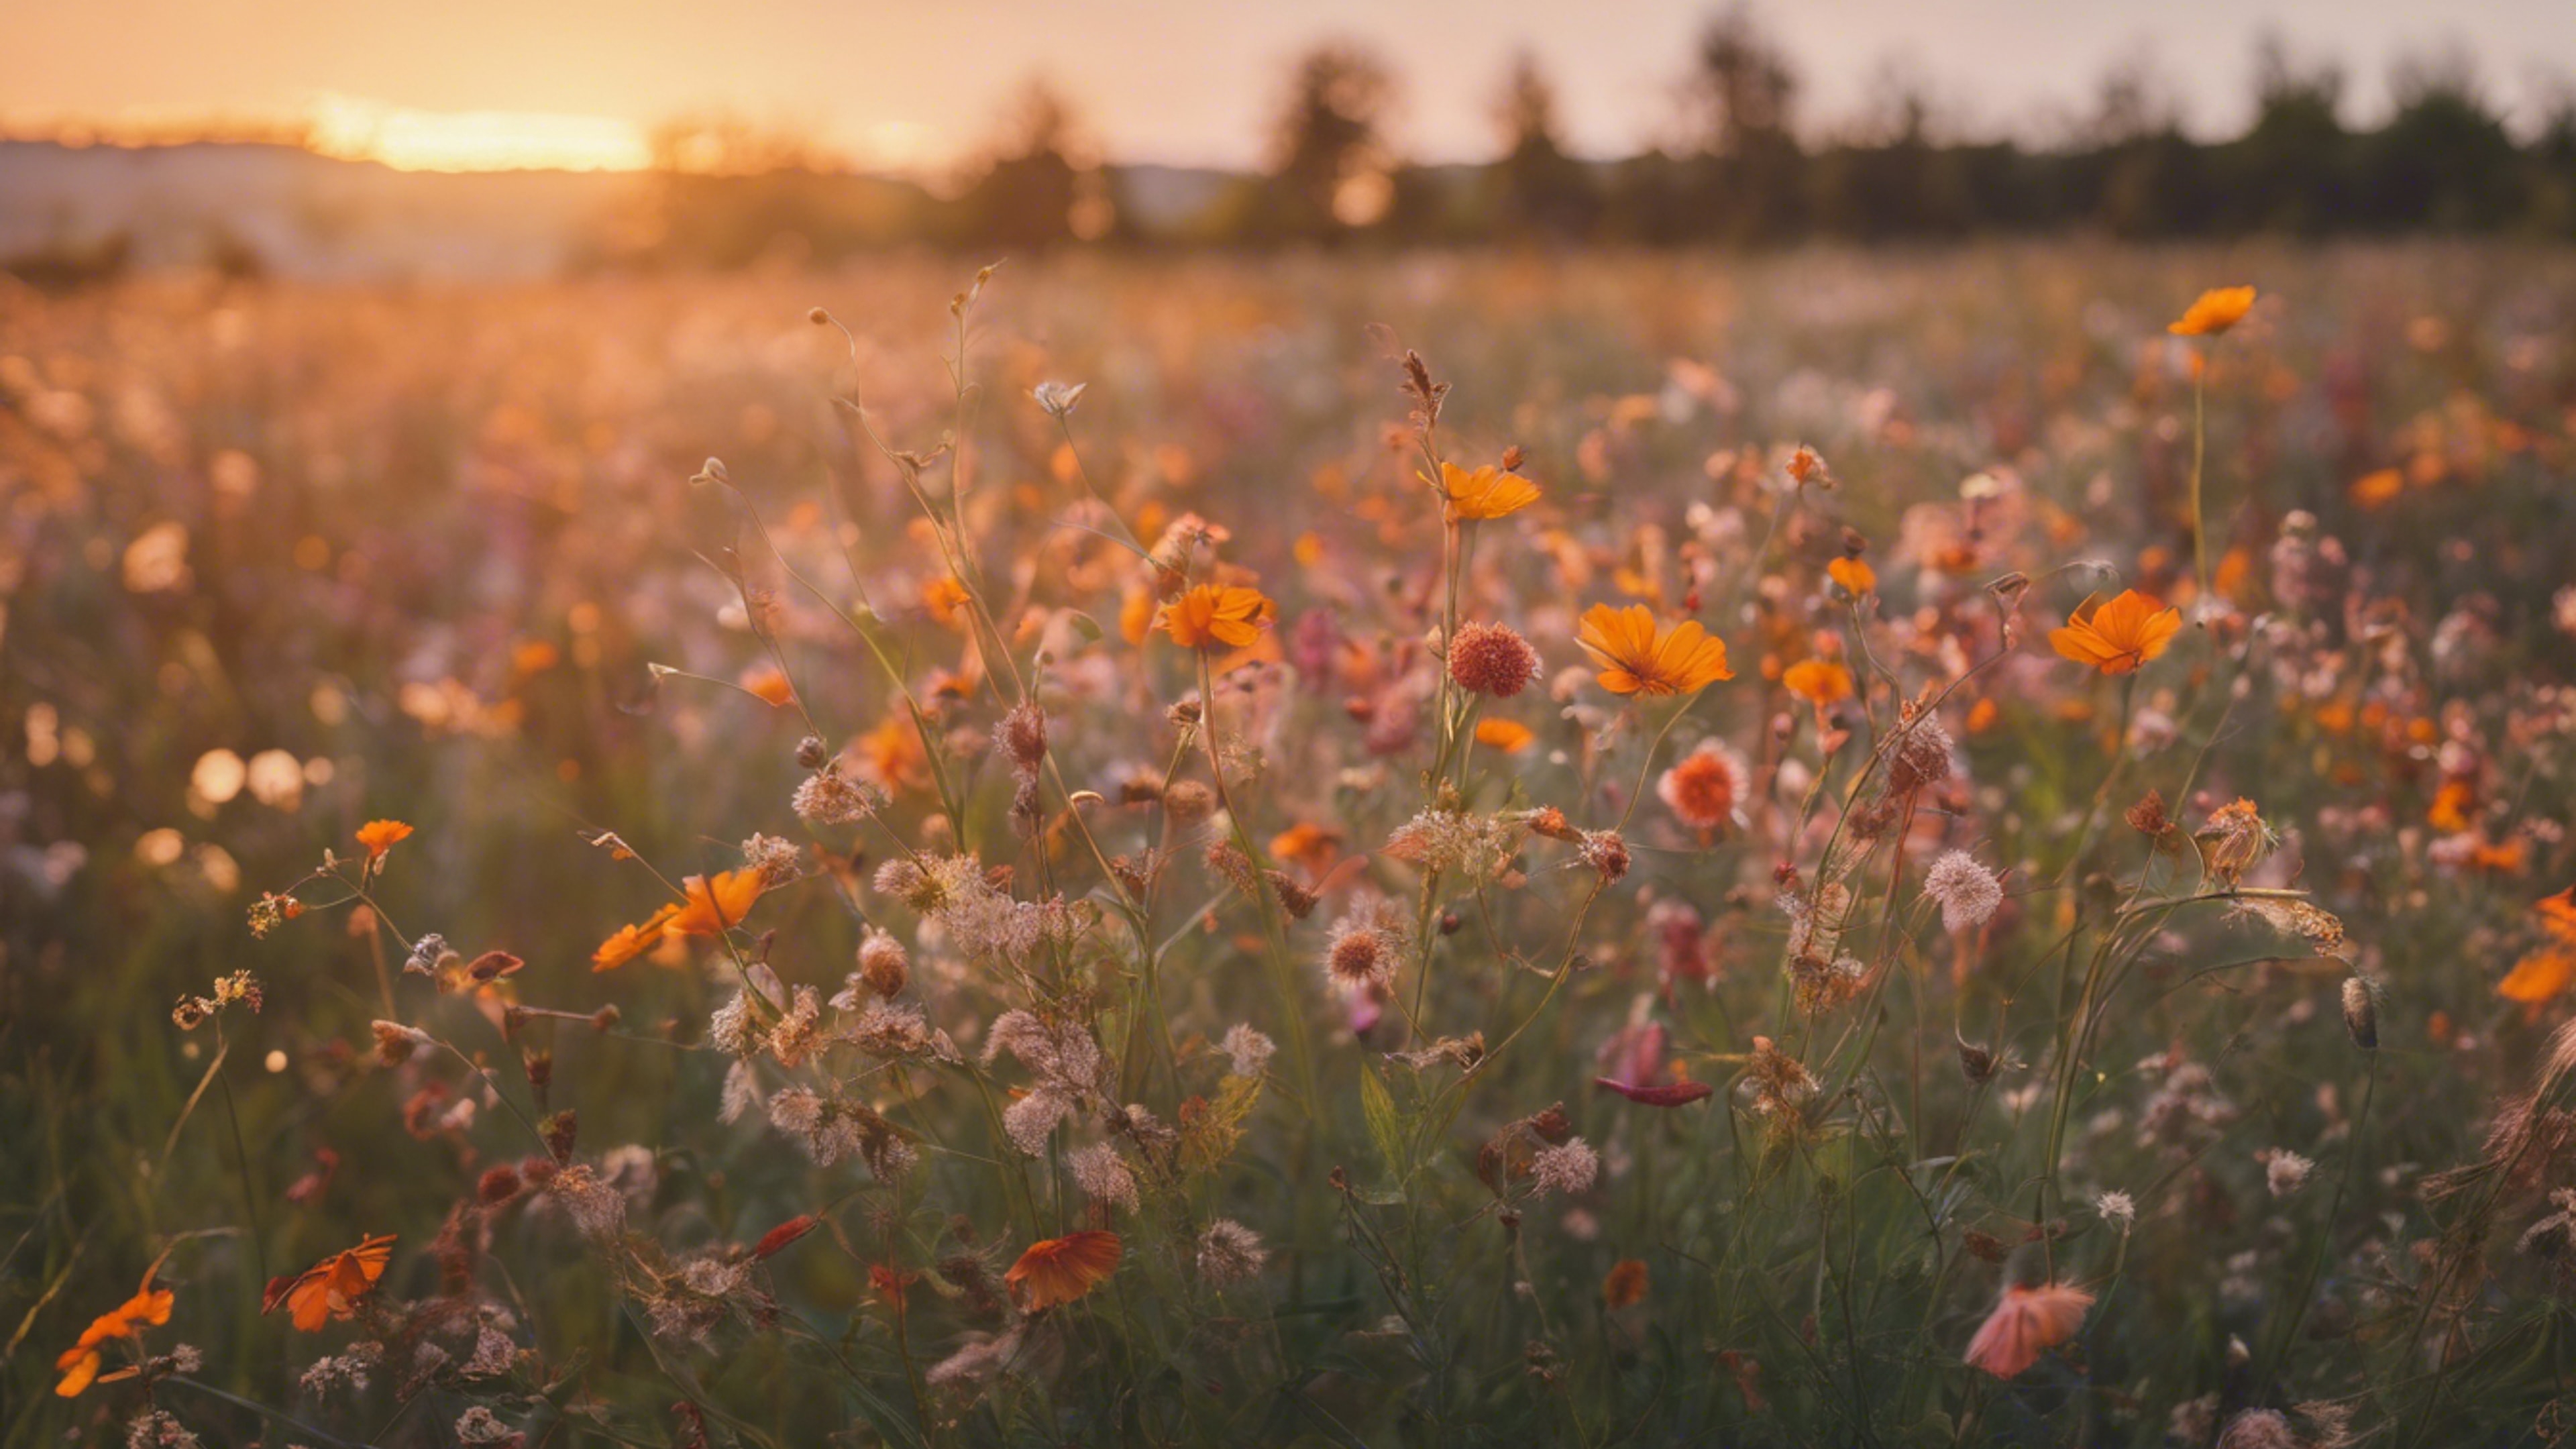 A nostalgic field of wildflowers in sunset hues. Wallpaper[1a5d684a5d8746a6914f]